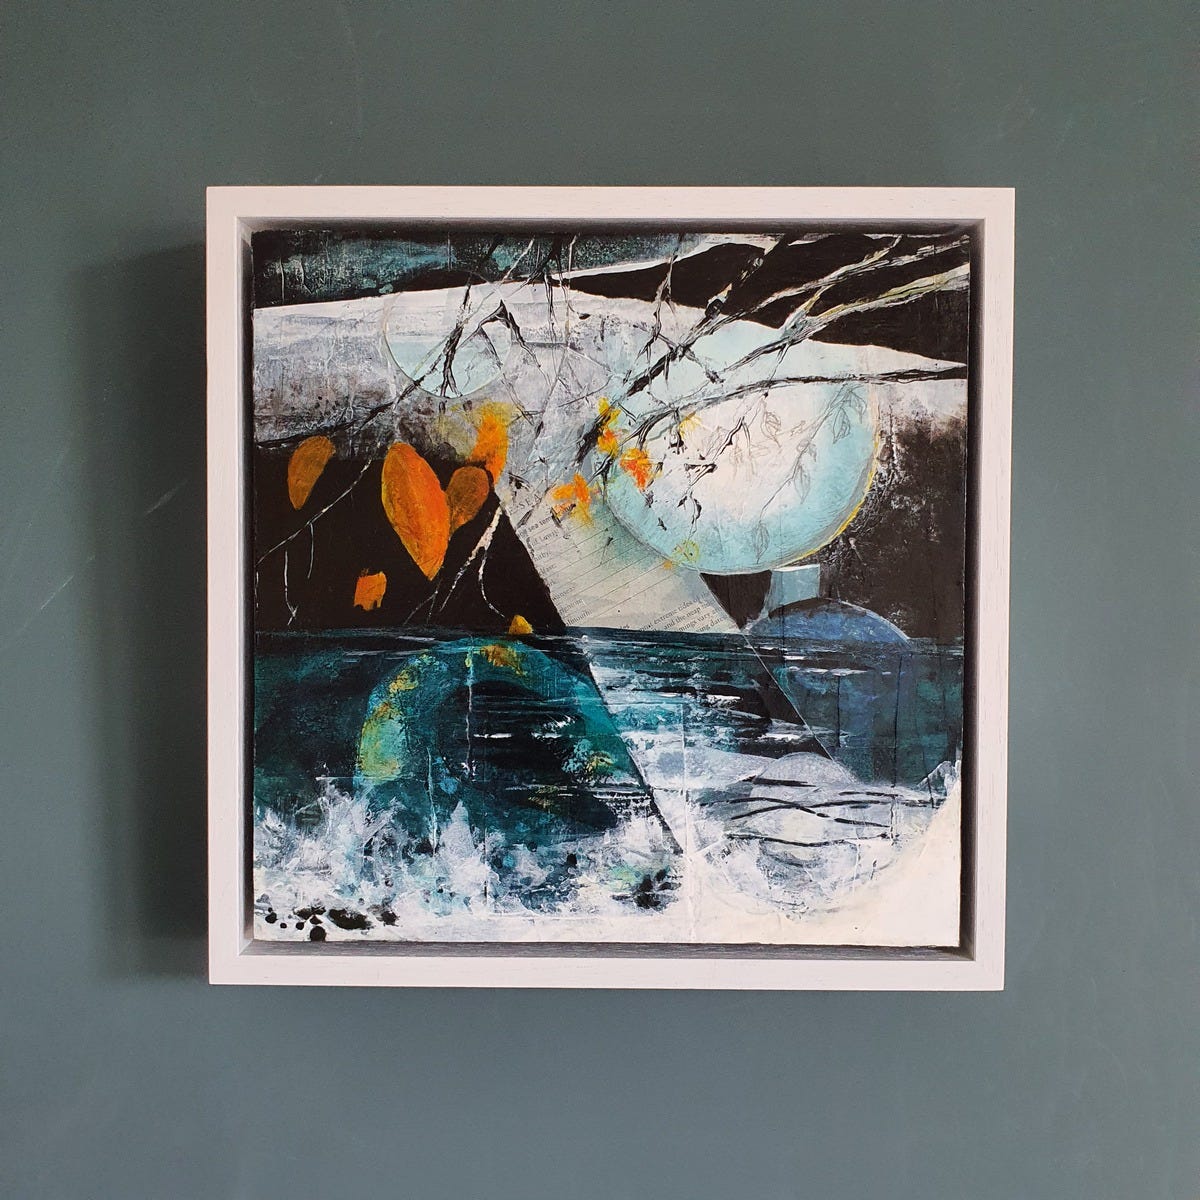 Rising on the wall framed in a white square tray frame. Rising is an abstract painting with a moon and water rising and a few orange leaves from a tree over the inky depths below